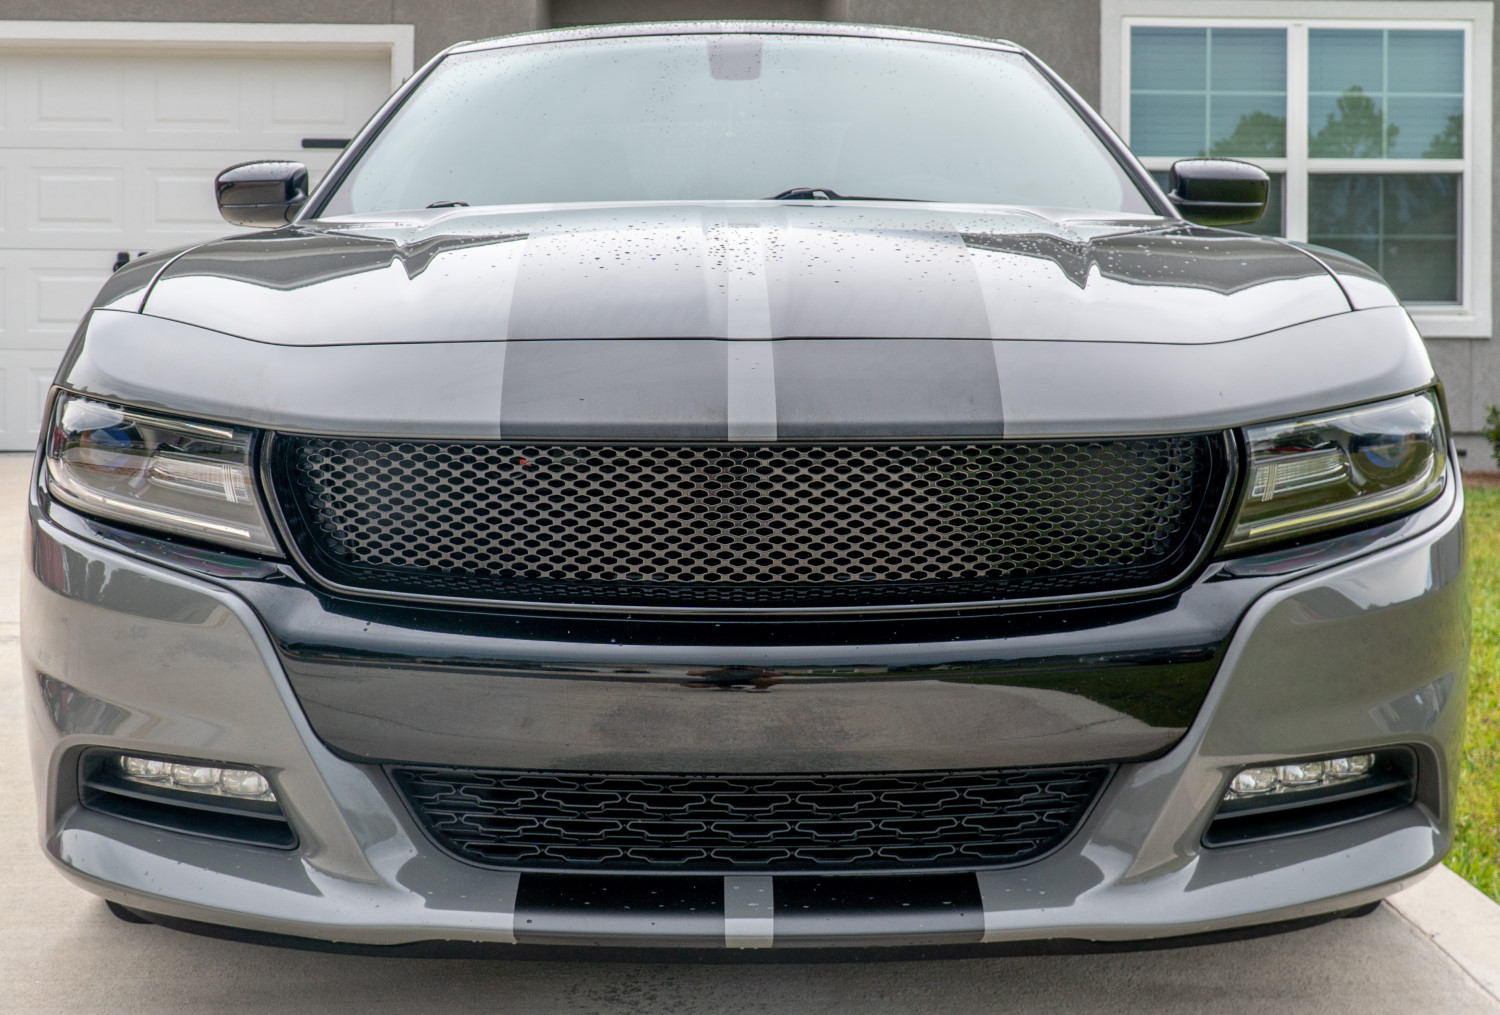 Introducing Our New Custom Mesh Grille for the 2015+ Dodge Charger